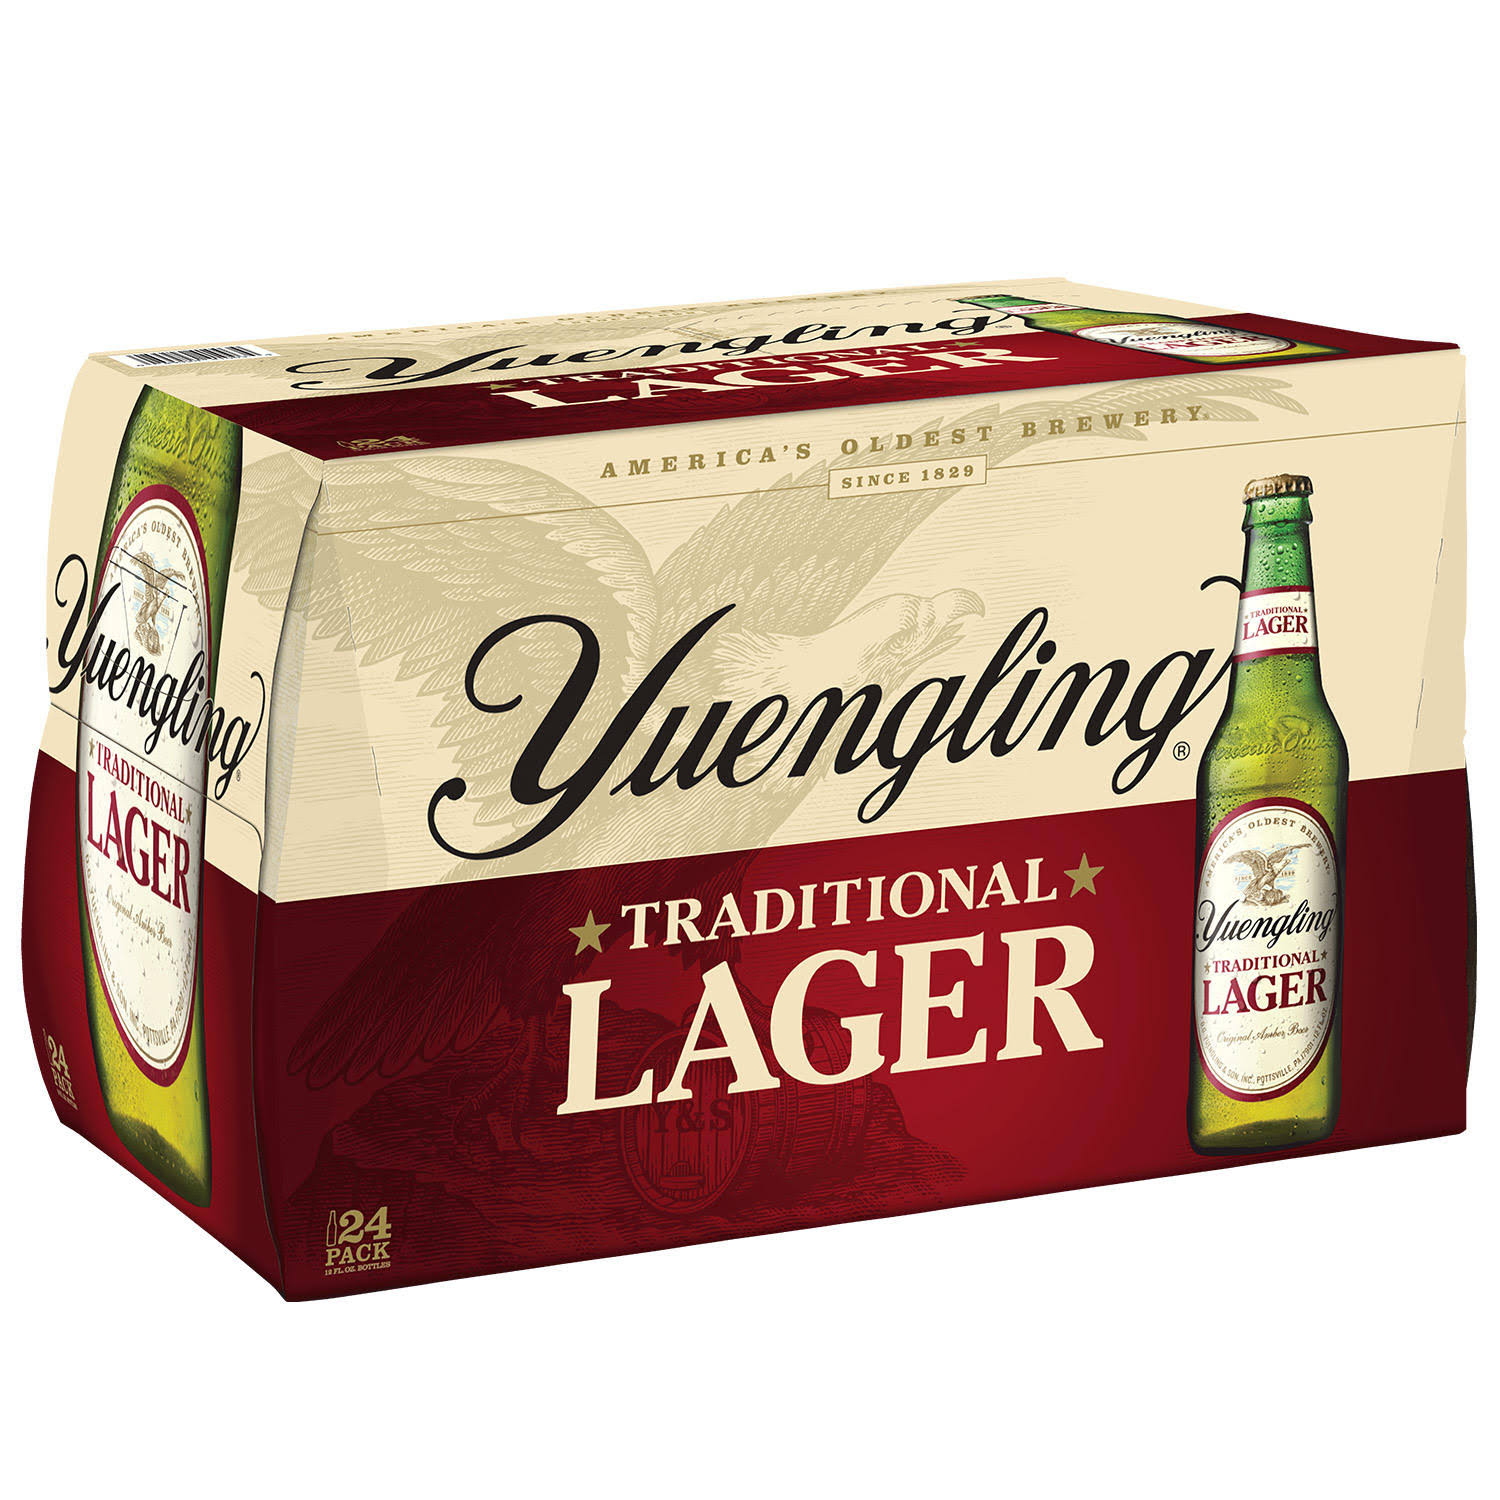 Yuengling Brewery Traditional Lager - 24 pack, 12 fl oz bottles